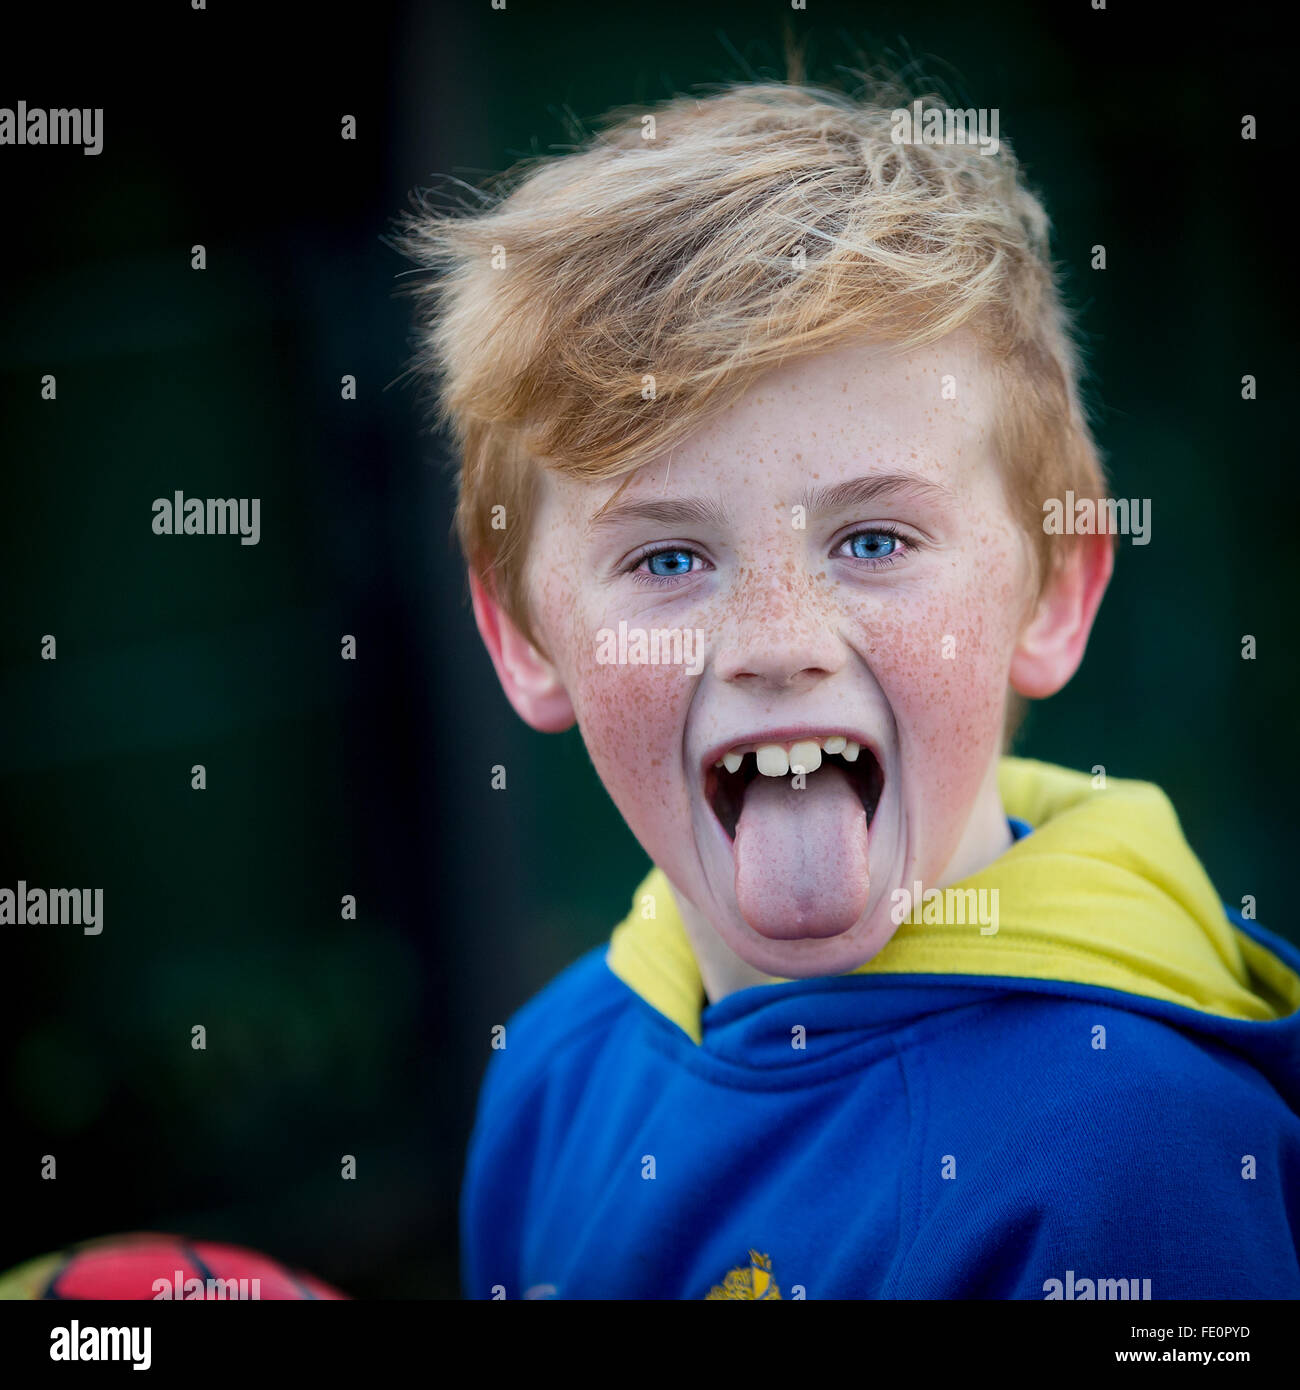 Young boy sticking his tongue out when he realizes he is having his photo taken Stock Photo